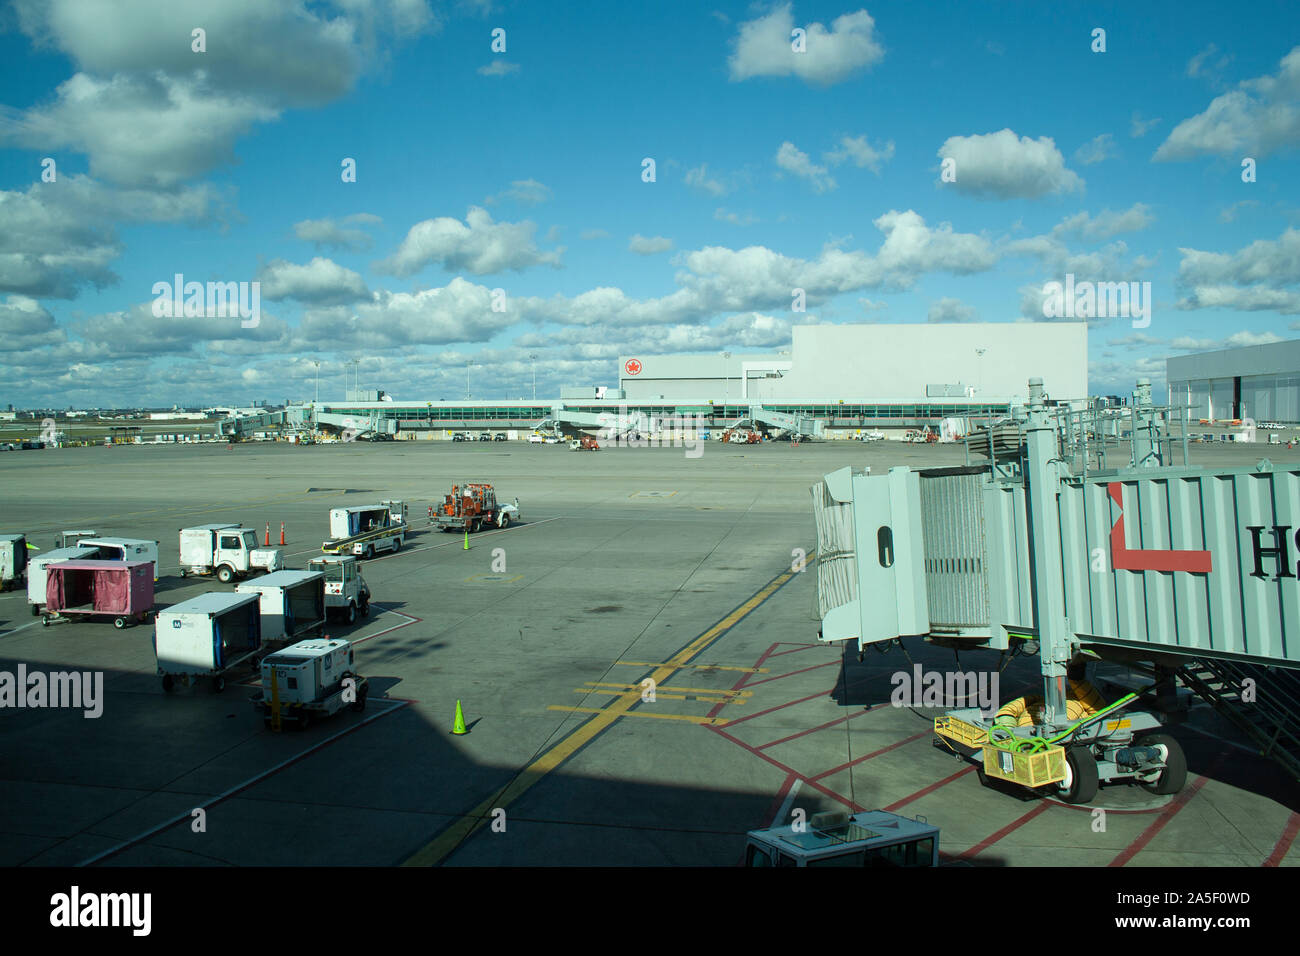 October 14, 2019 - Toronto, Ontario Canada- Looking out to the loading area of a terminal at Pearson Airport in Canada with luggage loading and gates Stock Photo